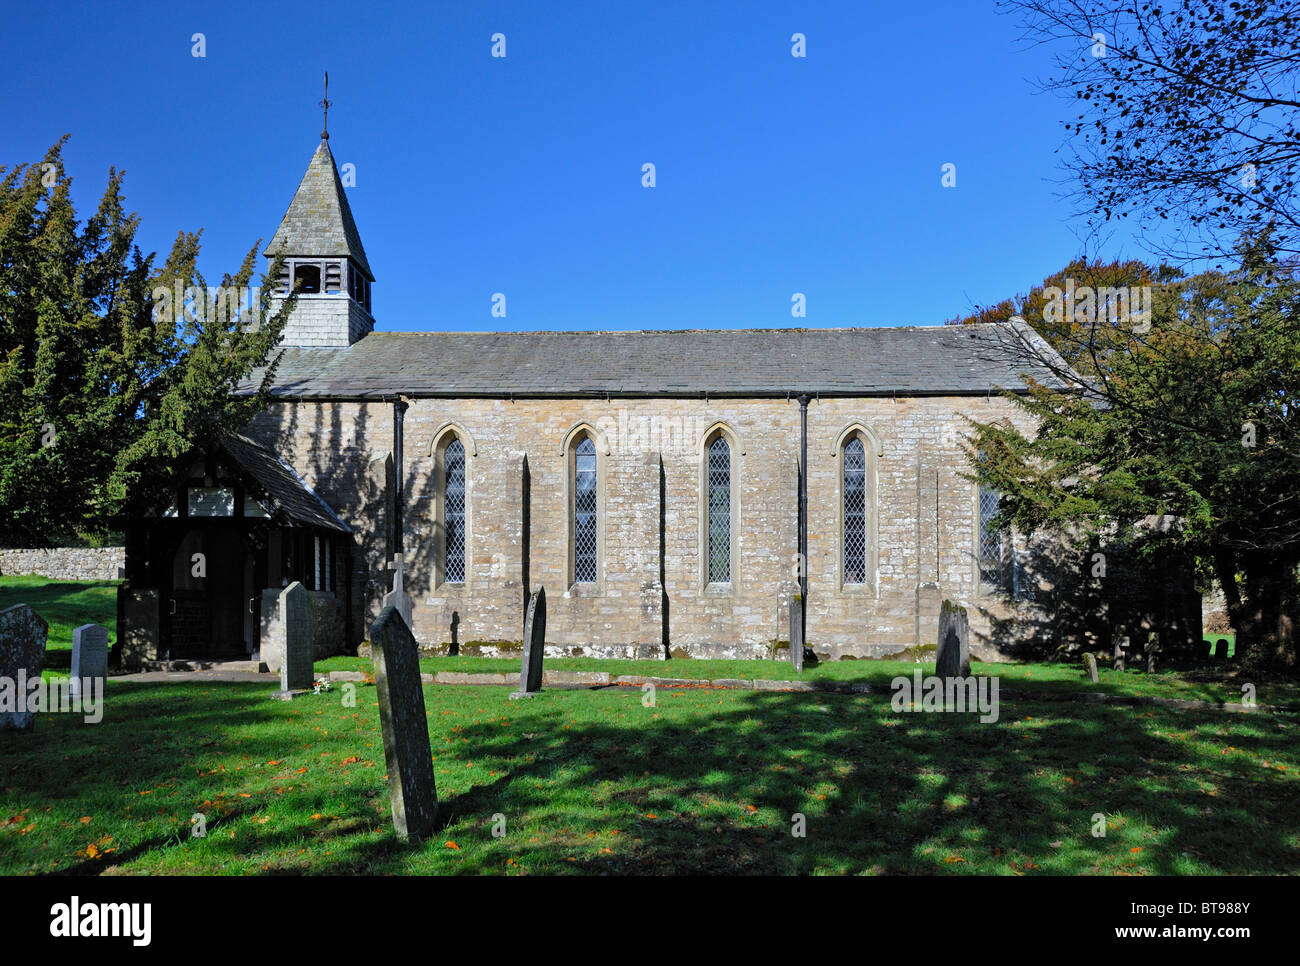 Church of Saint John the Evangelist. Cowgill, Dentdale, Yorkshire Dales National Park, Cumbria, England, United Kingdom, Europe. Stock Photo